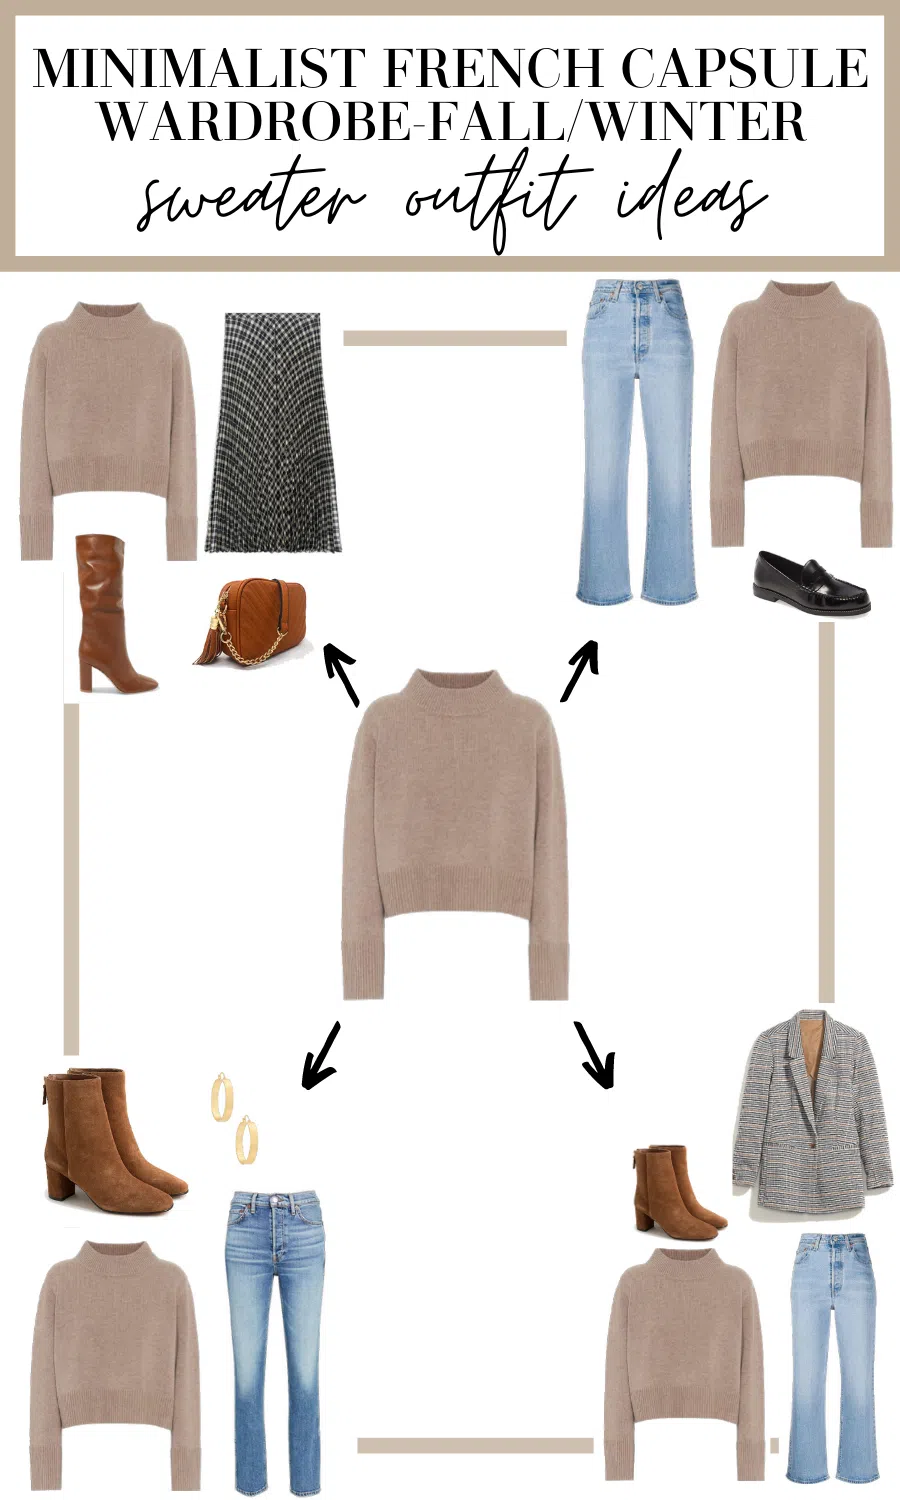 sweater outfit ideas